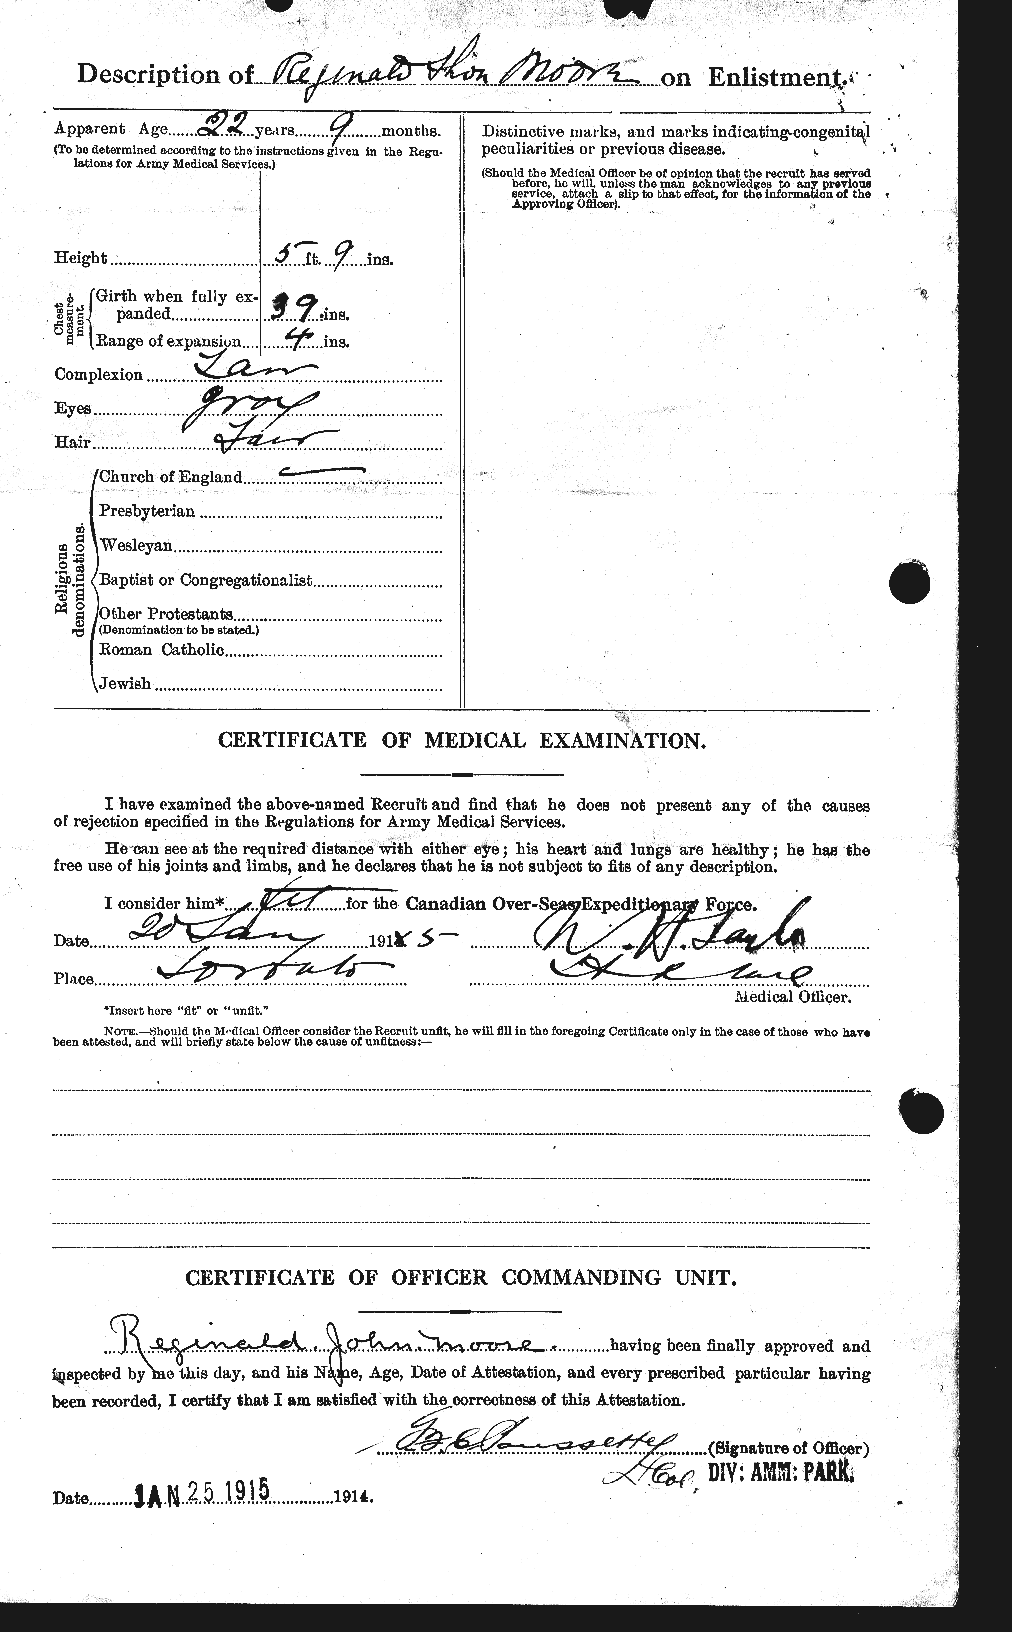 Personnel Records of the First World War - CEF 503324b